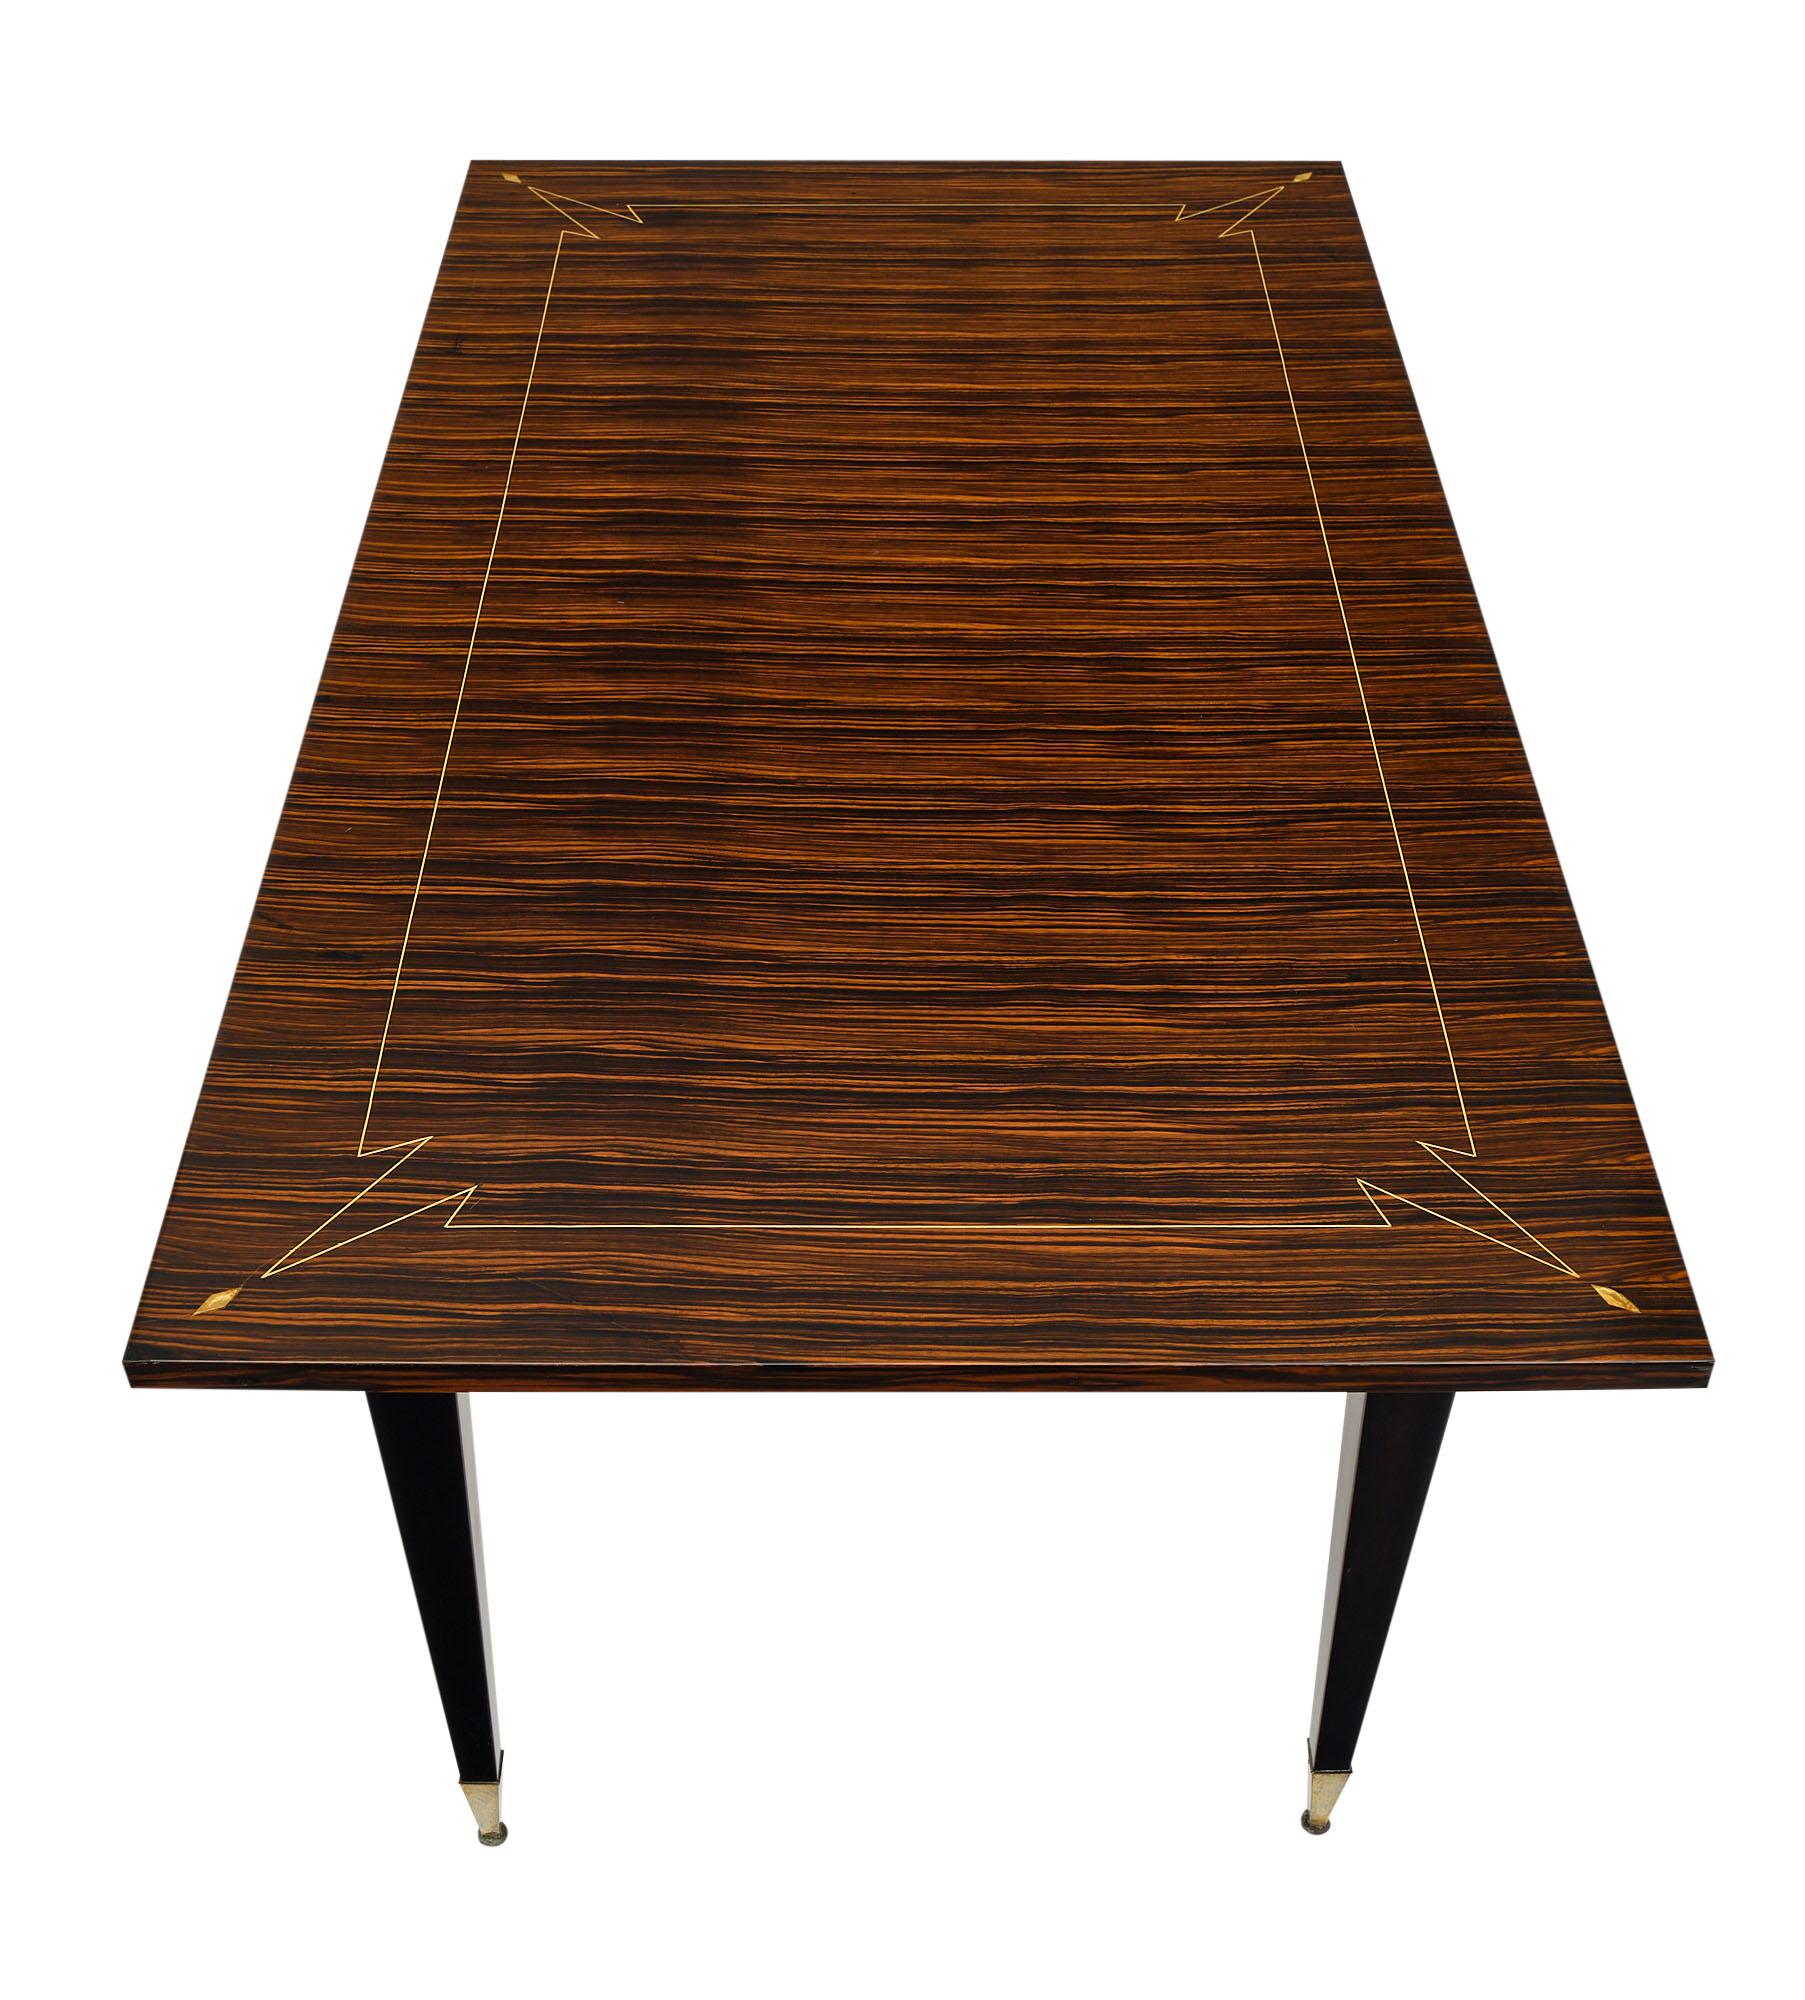 Dining room table from France made of Macassar veneer with mother of pearl inlays. This piece is supported by tapered legs with brass feet.